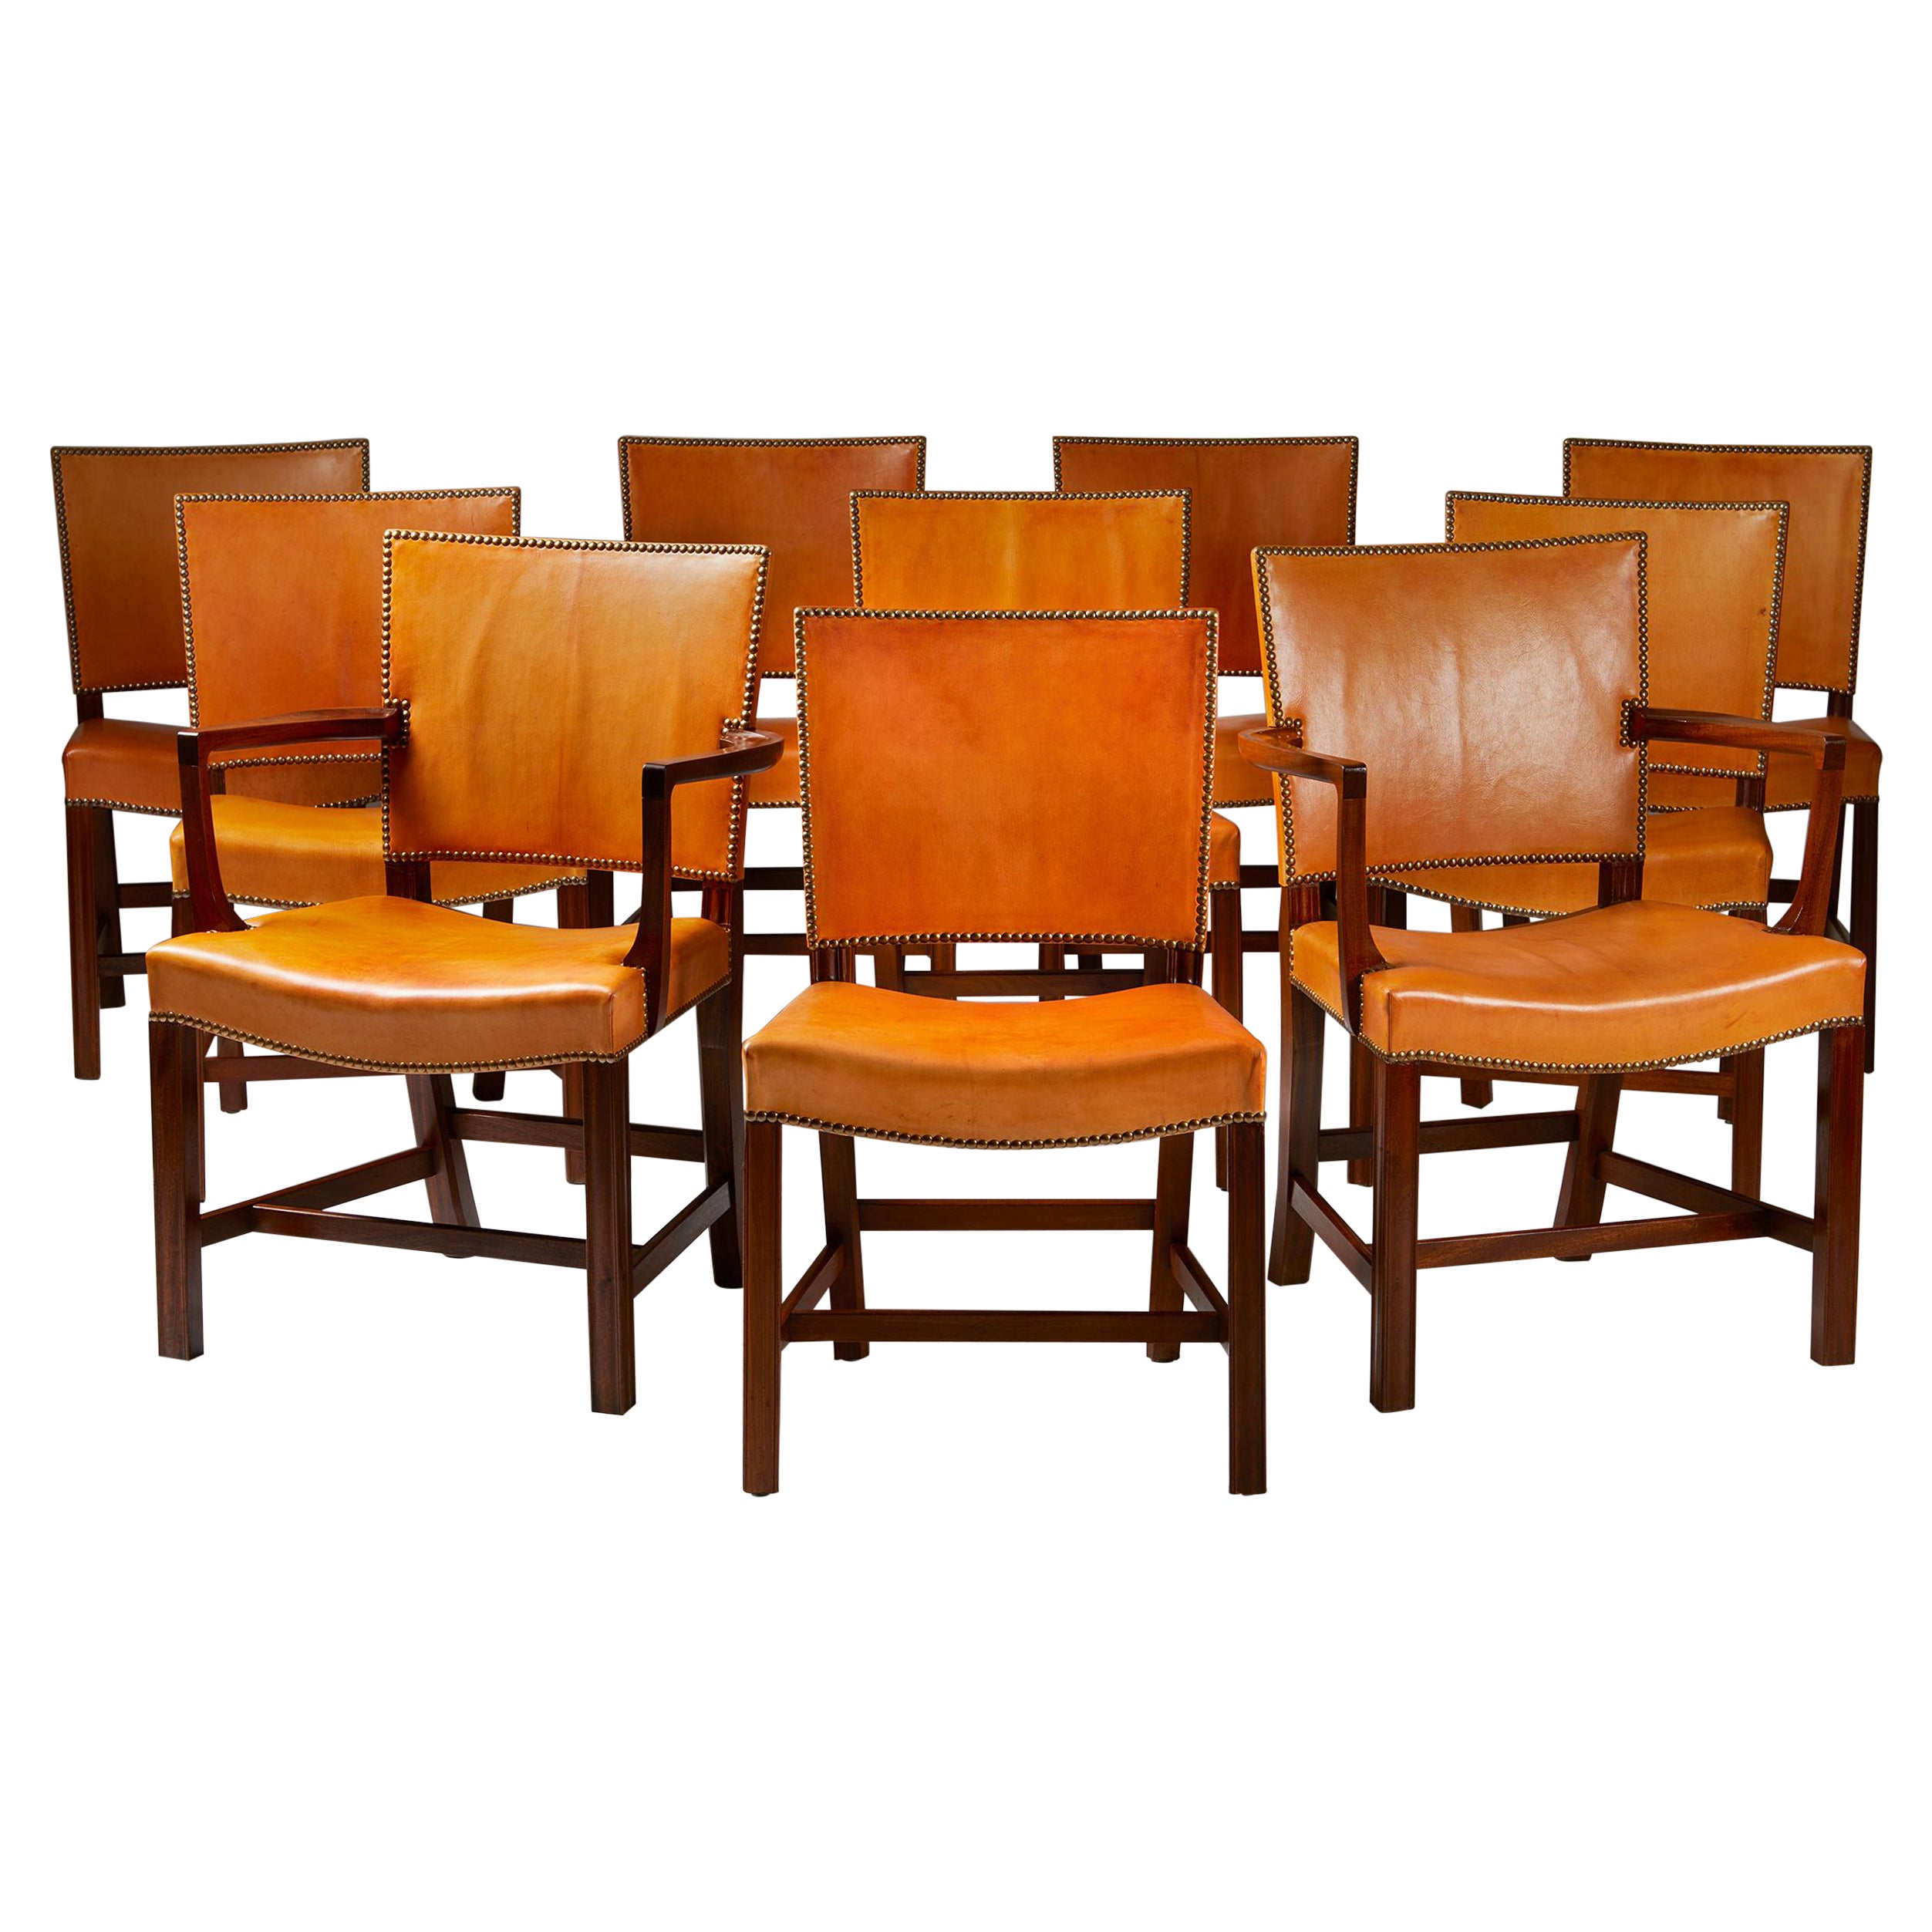 Set of Ten Dining Chairs Model 4751 and 3758A, Designed by Kaare Klint